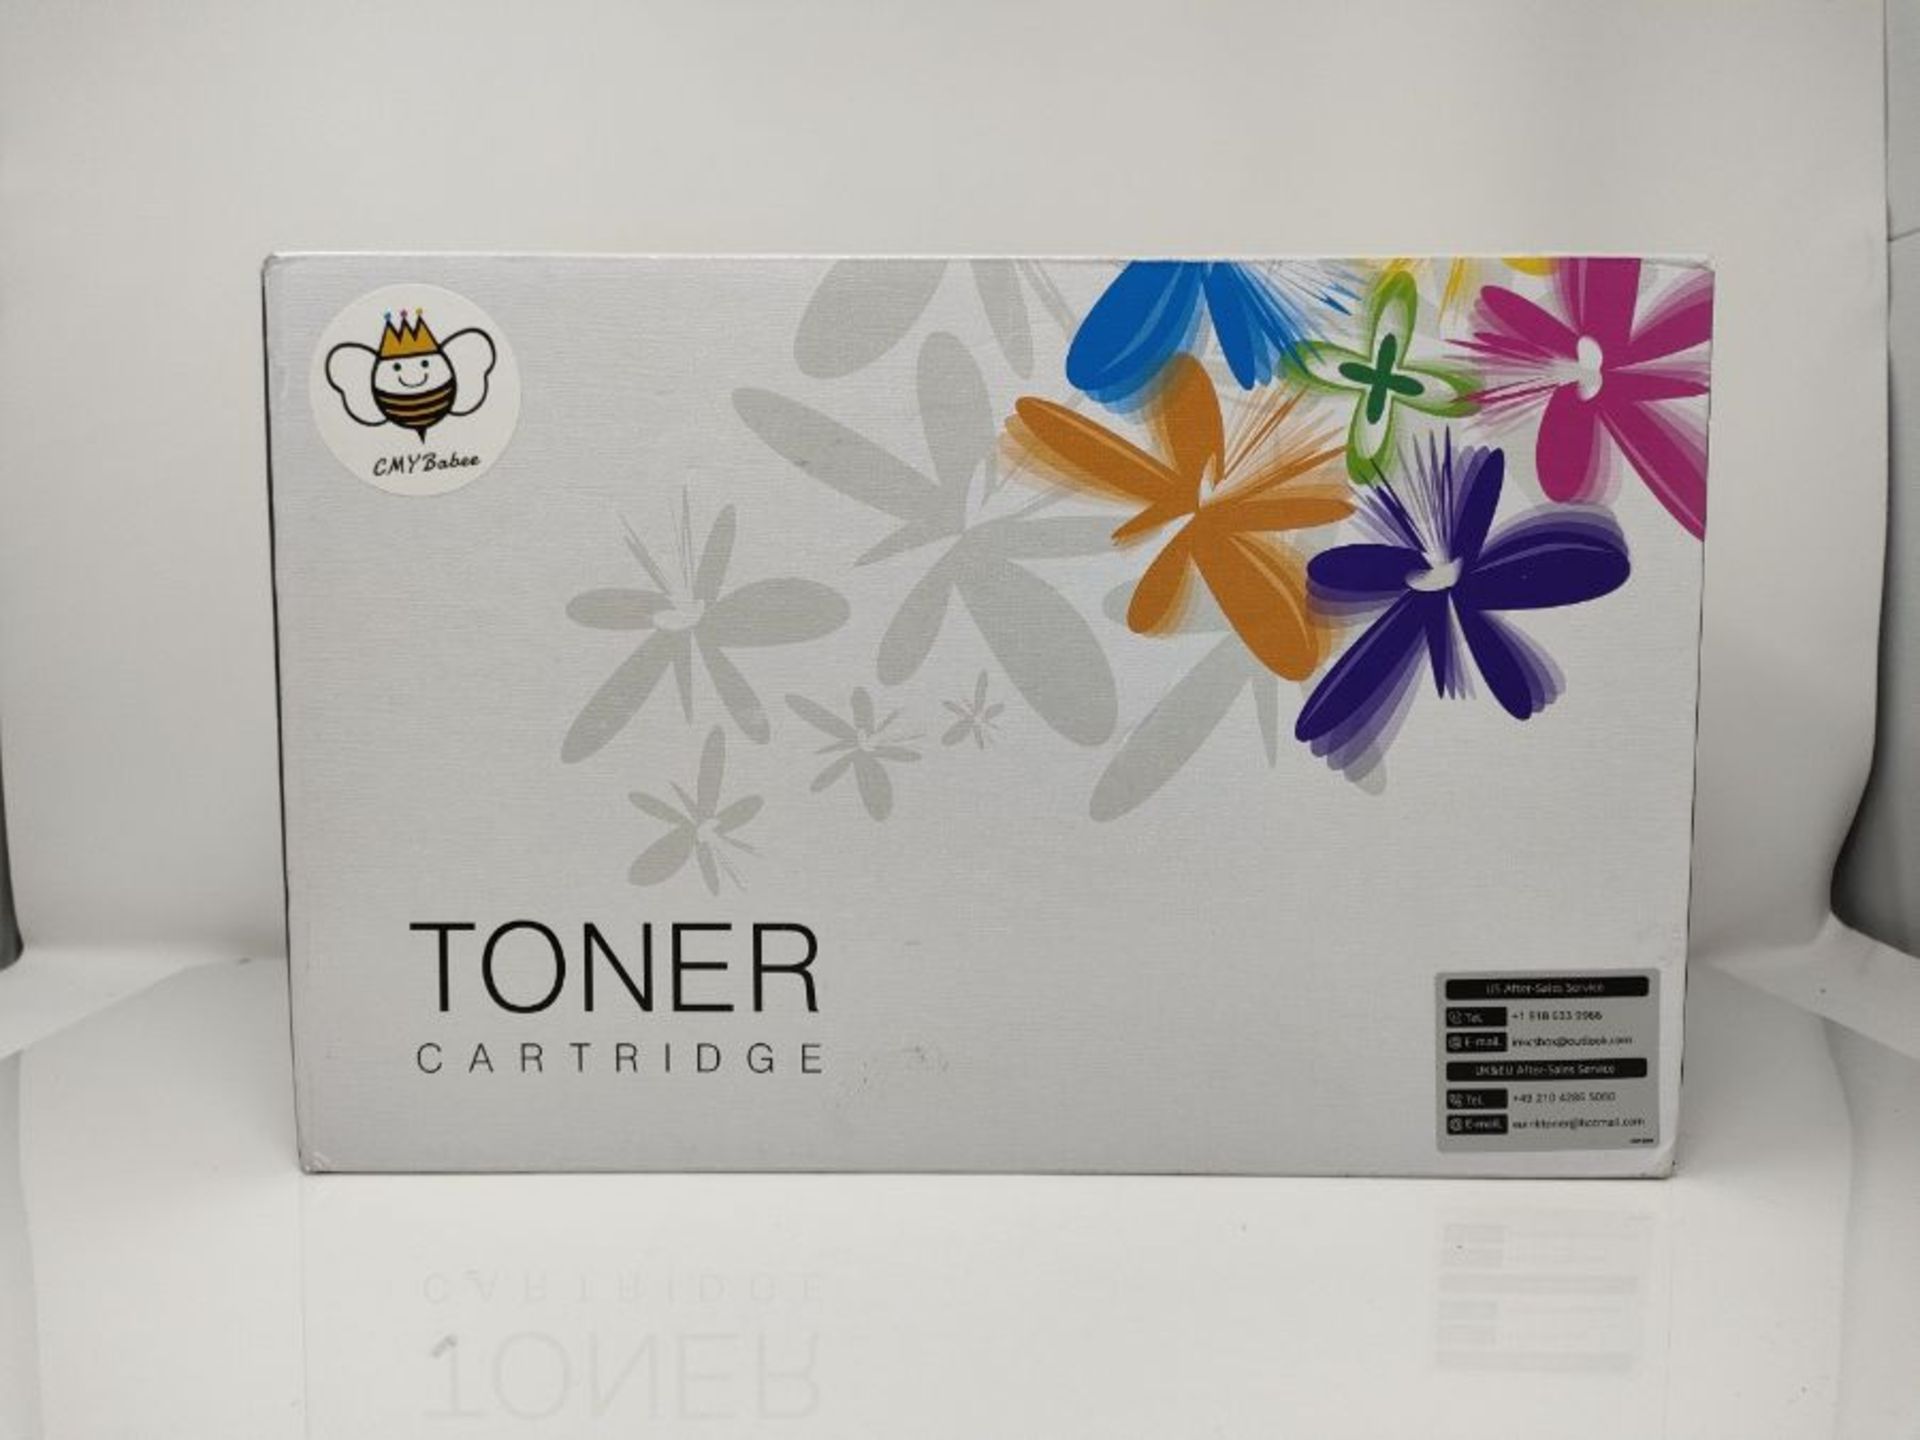 CMYBabee Compatible for HP CF259A CF259X 59A 59X Toner Cartridge for HP Laserjet Pro M - Image 2 of 3